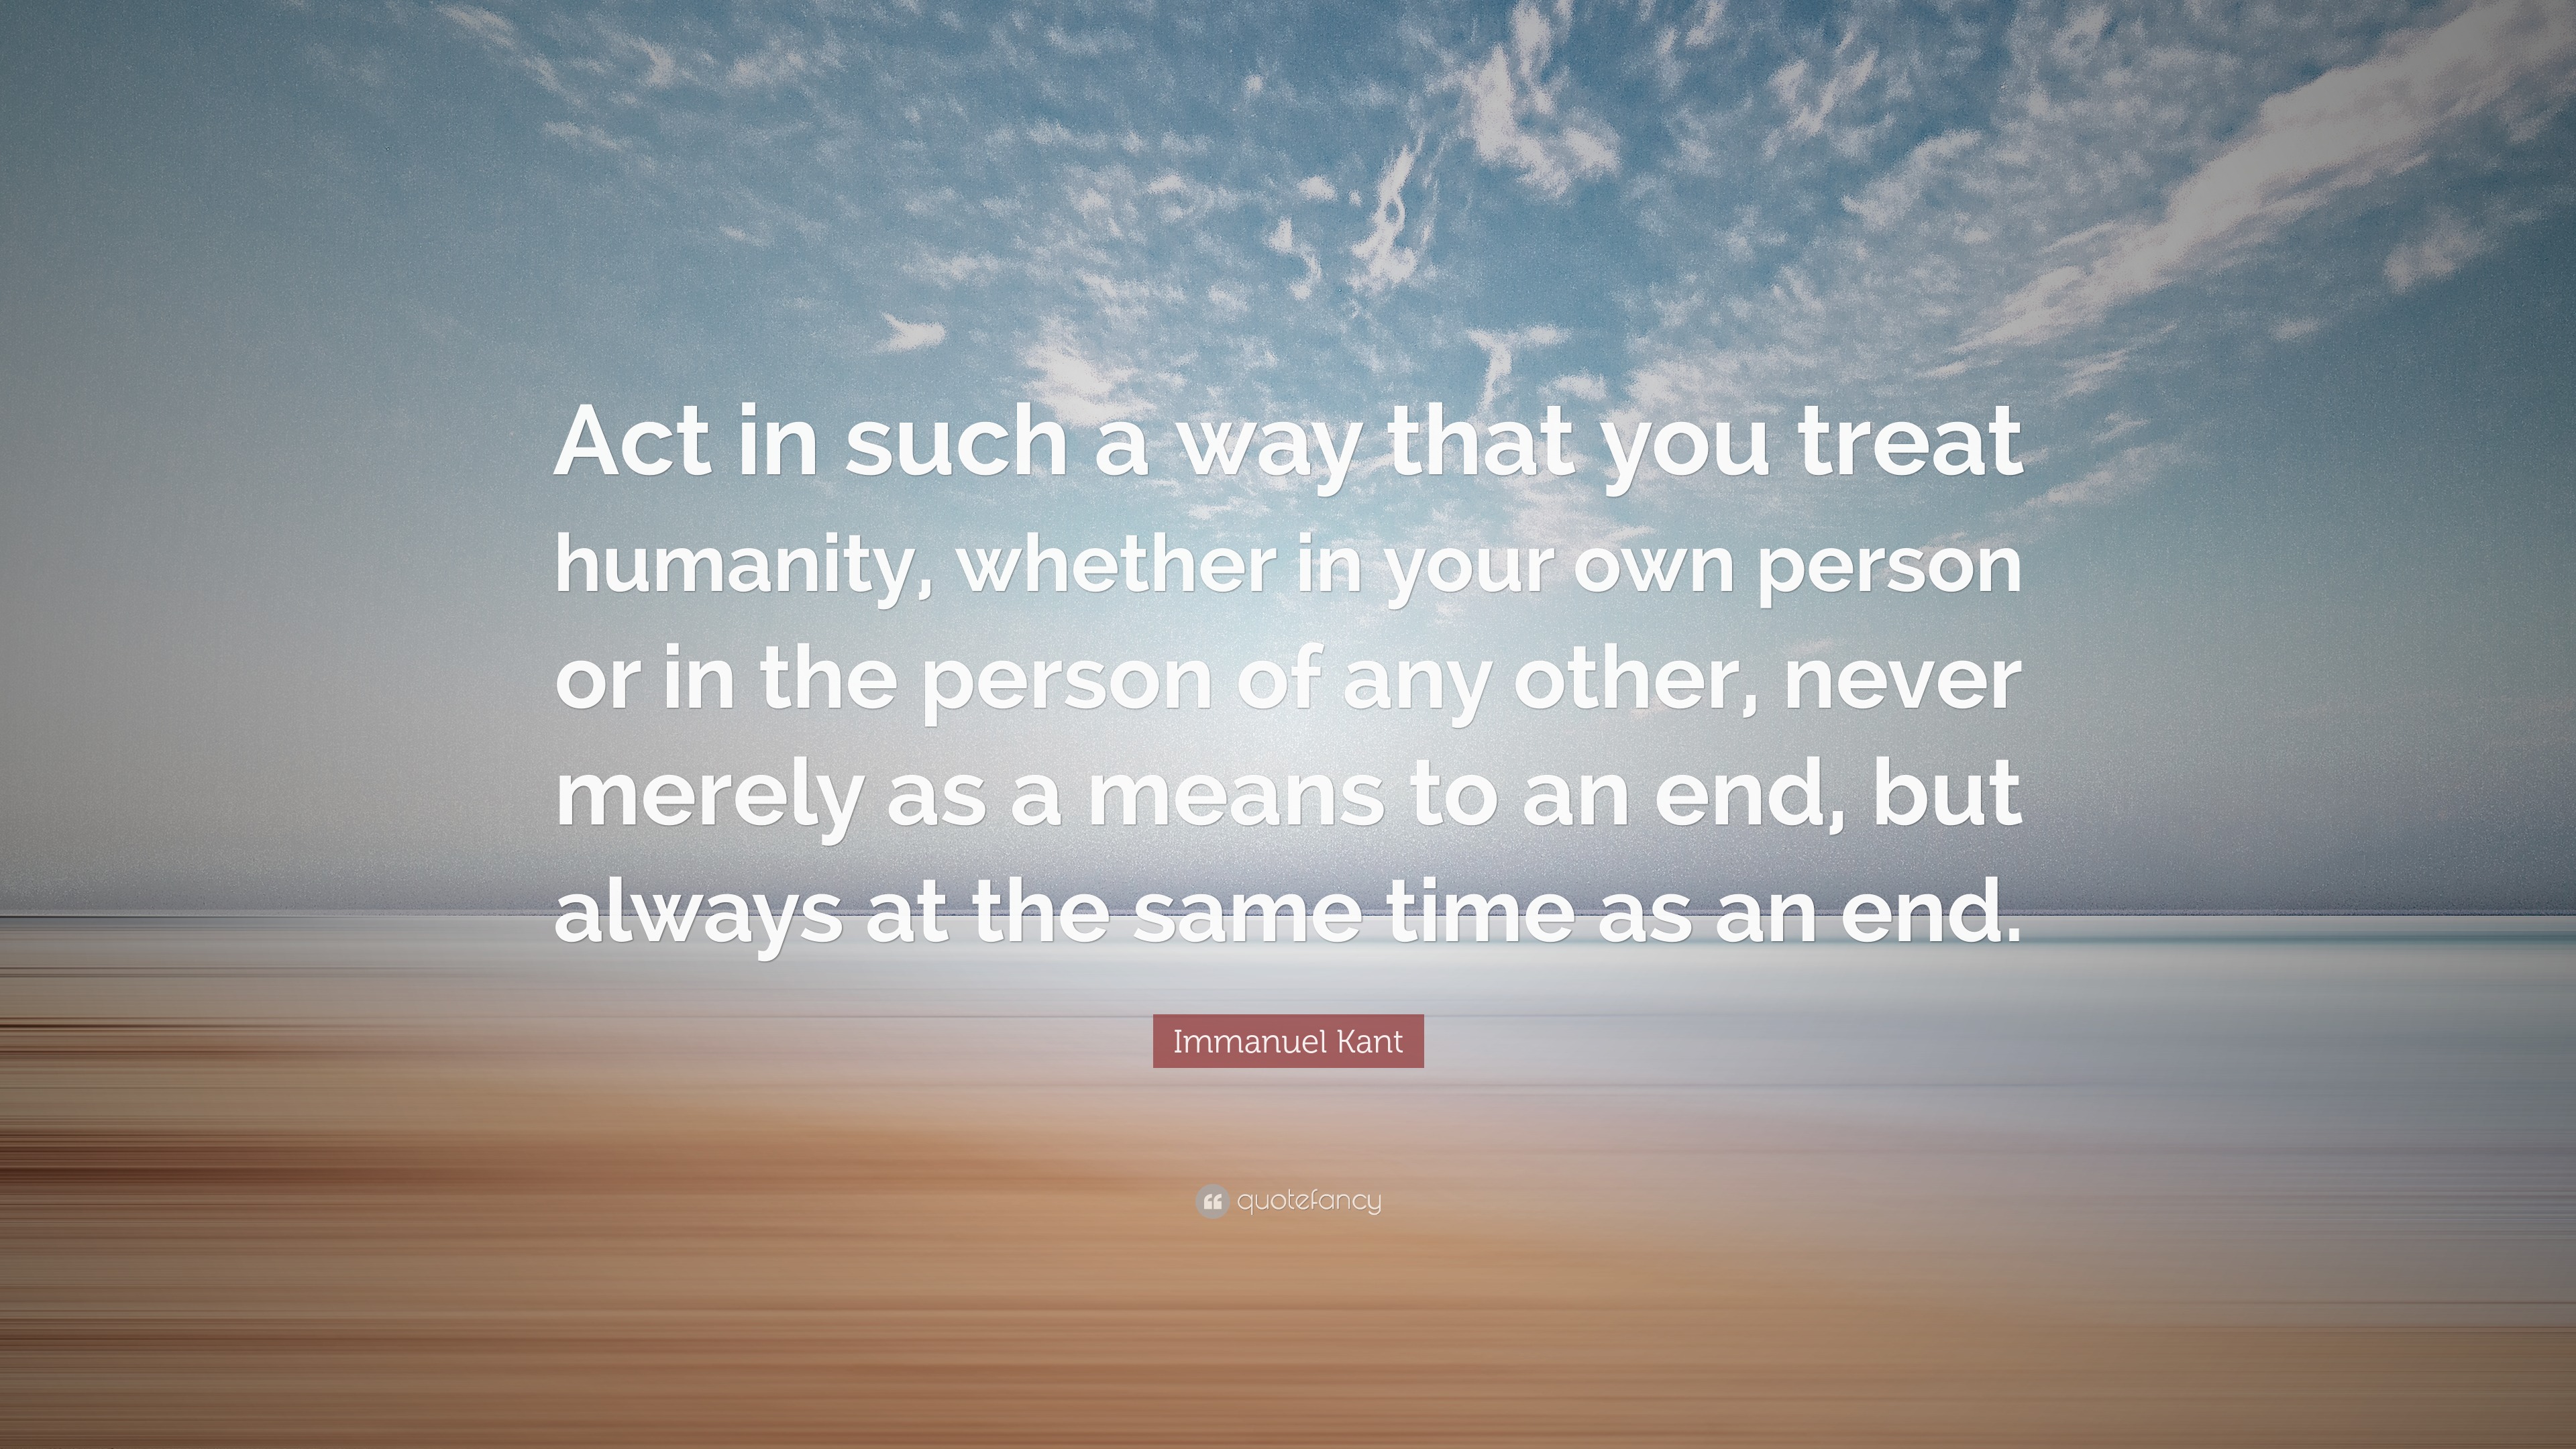 Immanuel Kant Quote: “Act in such a way that you treat humanity